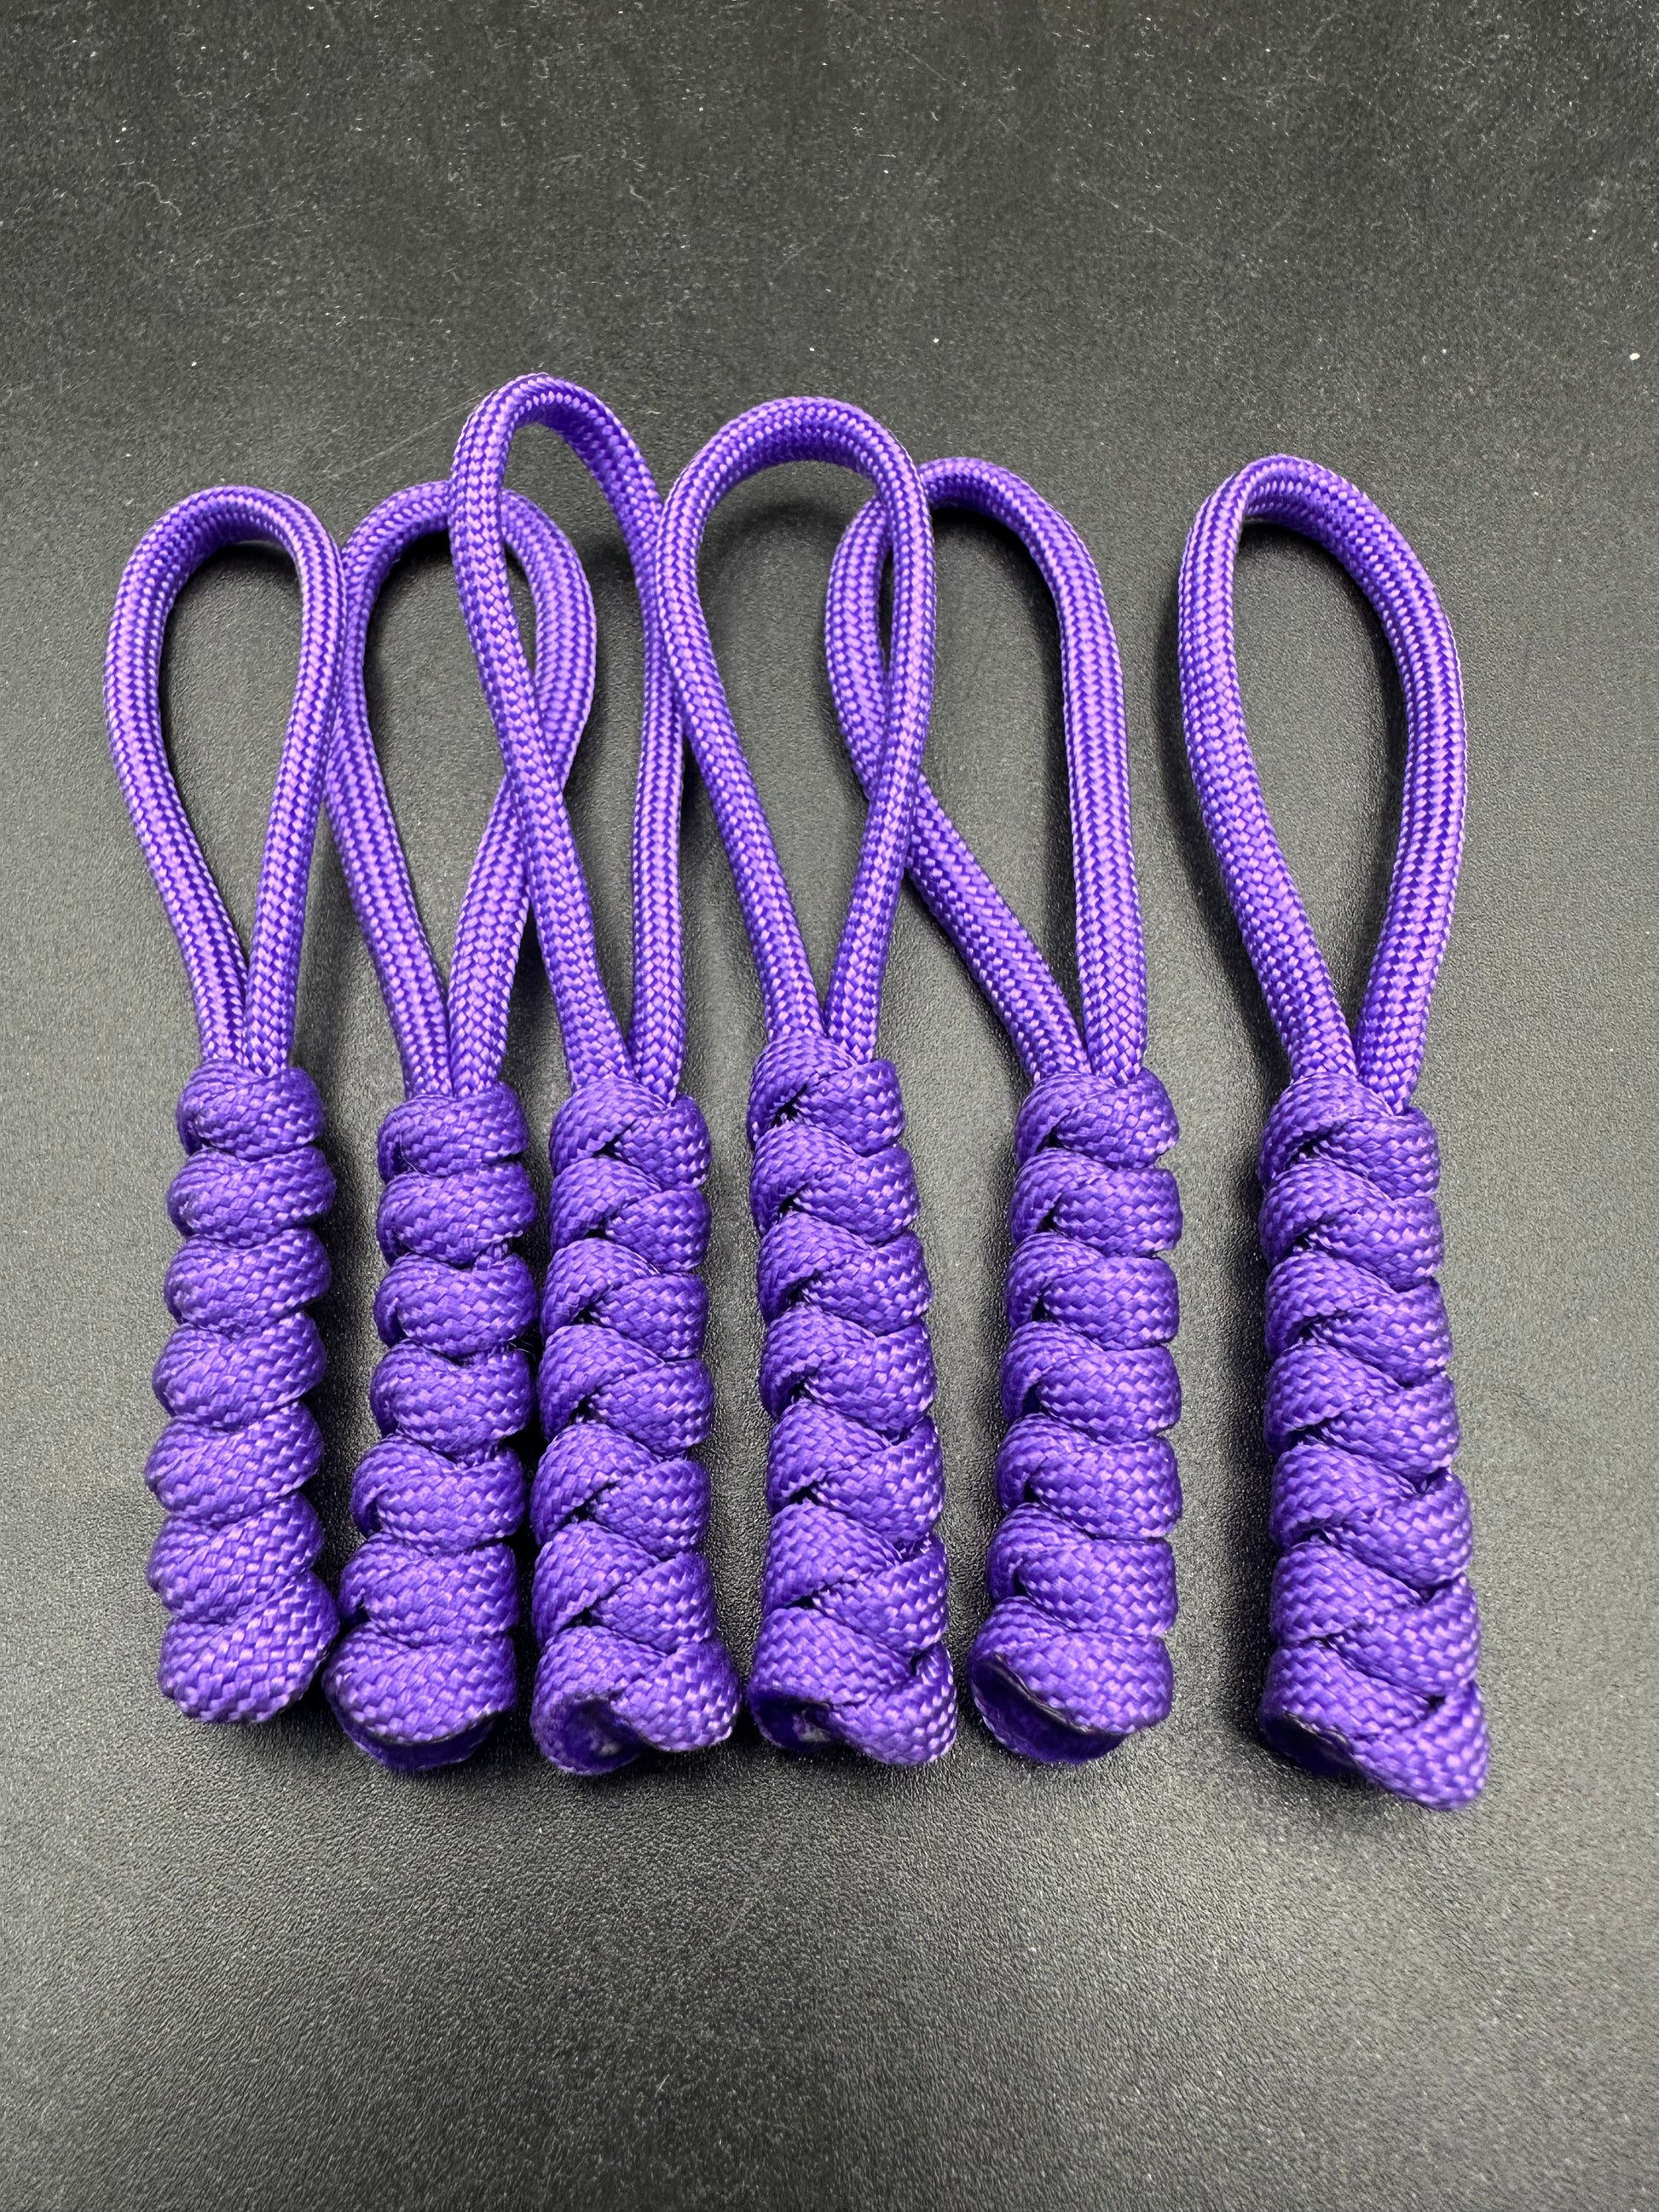 Paracord zip pulls in a Halloween themed purple
Sold as a 6 pack theses are light weight, strong and all handmade in our U.K. store